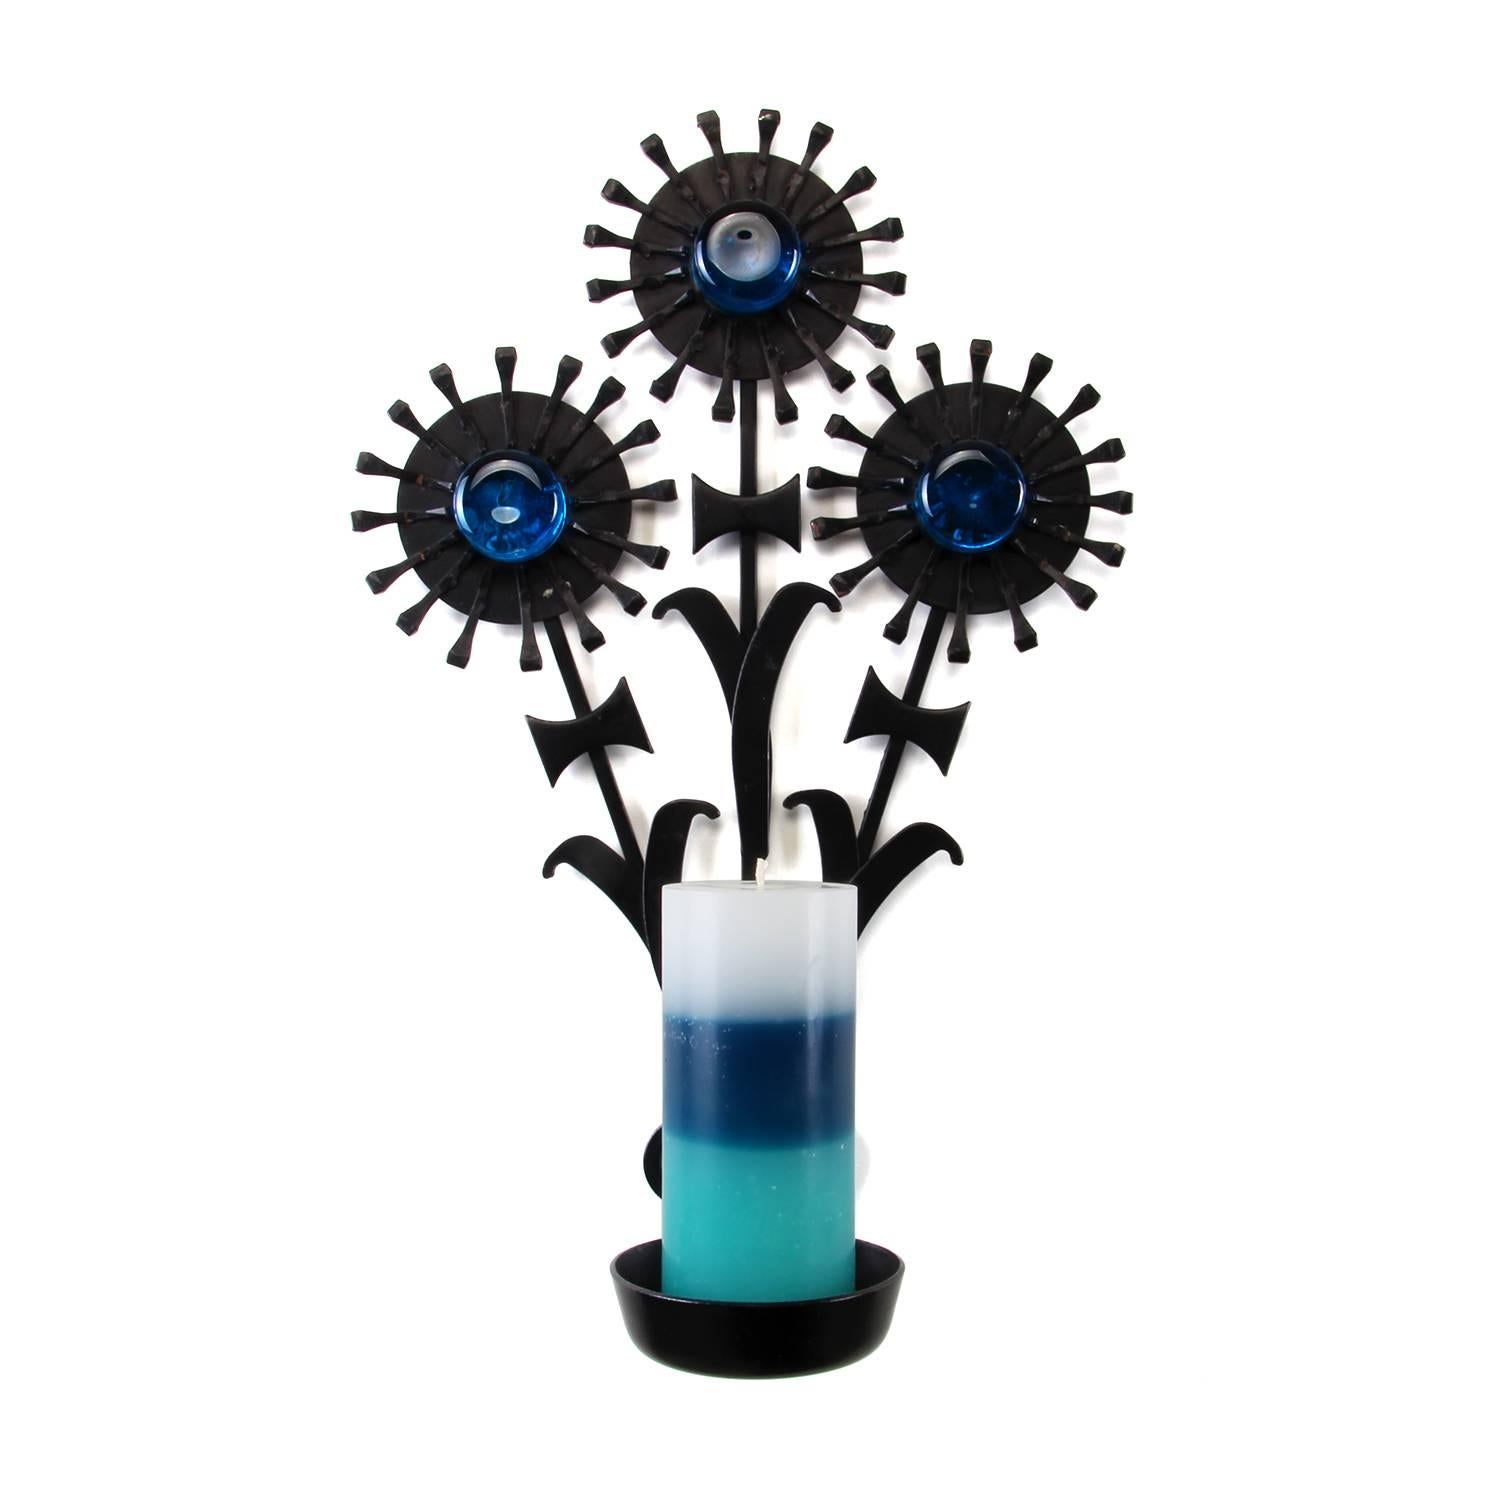 Sconce, wrought iron by Dantoft Kunstartikler, Denmark, circa 1960s, beautiful and sculptural black candleholder with three blue glass stones, in very good vintage condition.

A sculptural sconce made in black lacquered, welded wrought iron and